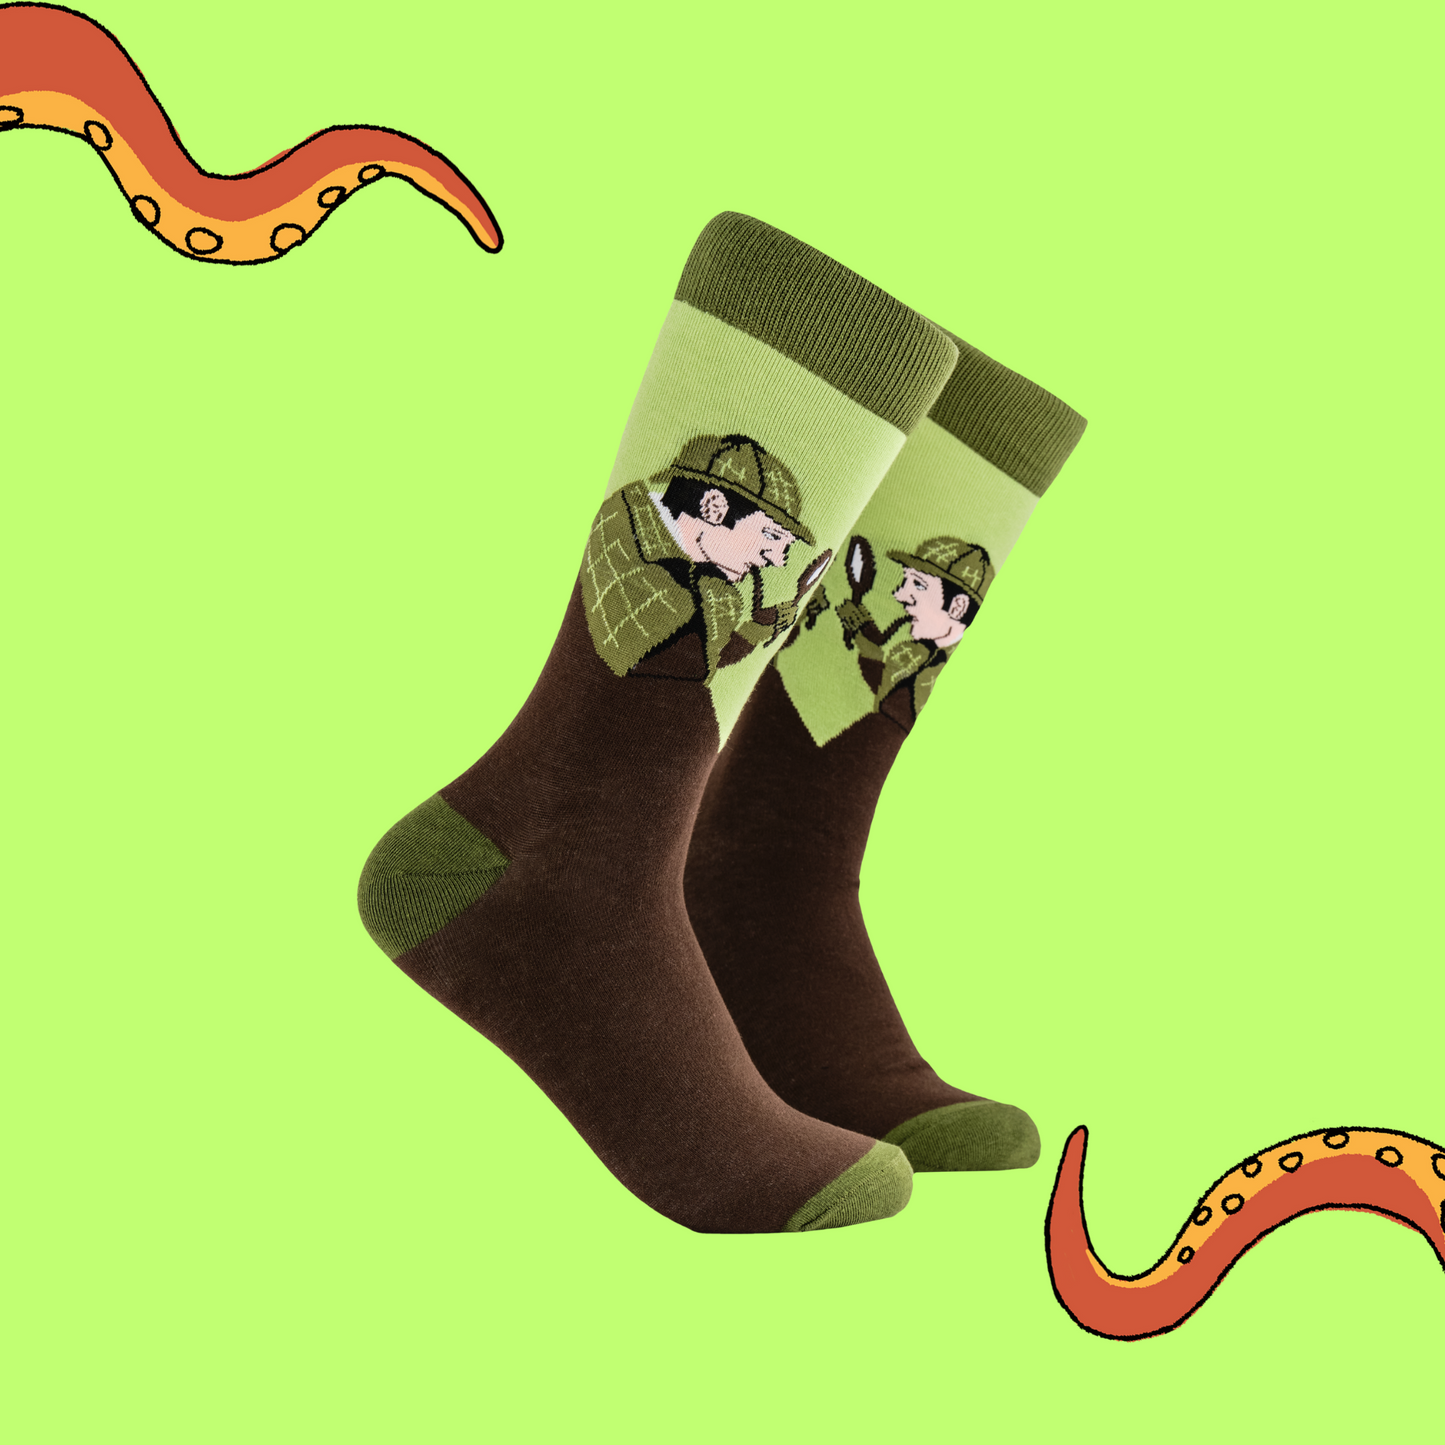  A pair of socks depicting Sherlock Holmes with hat and pipe. Brown legs, green cuff, heel and toe.